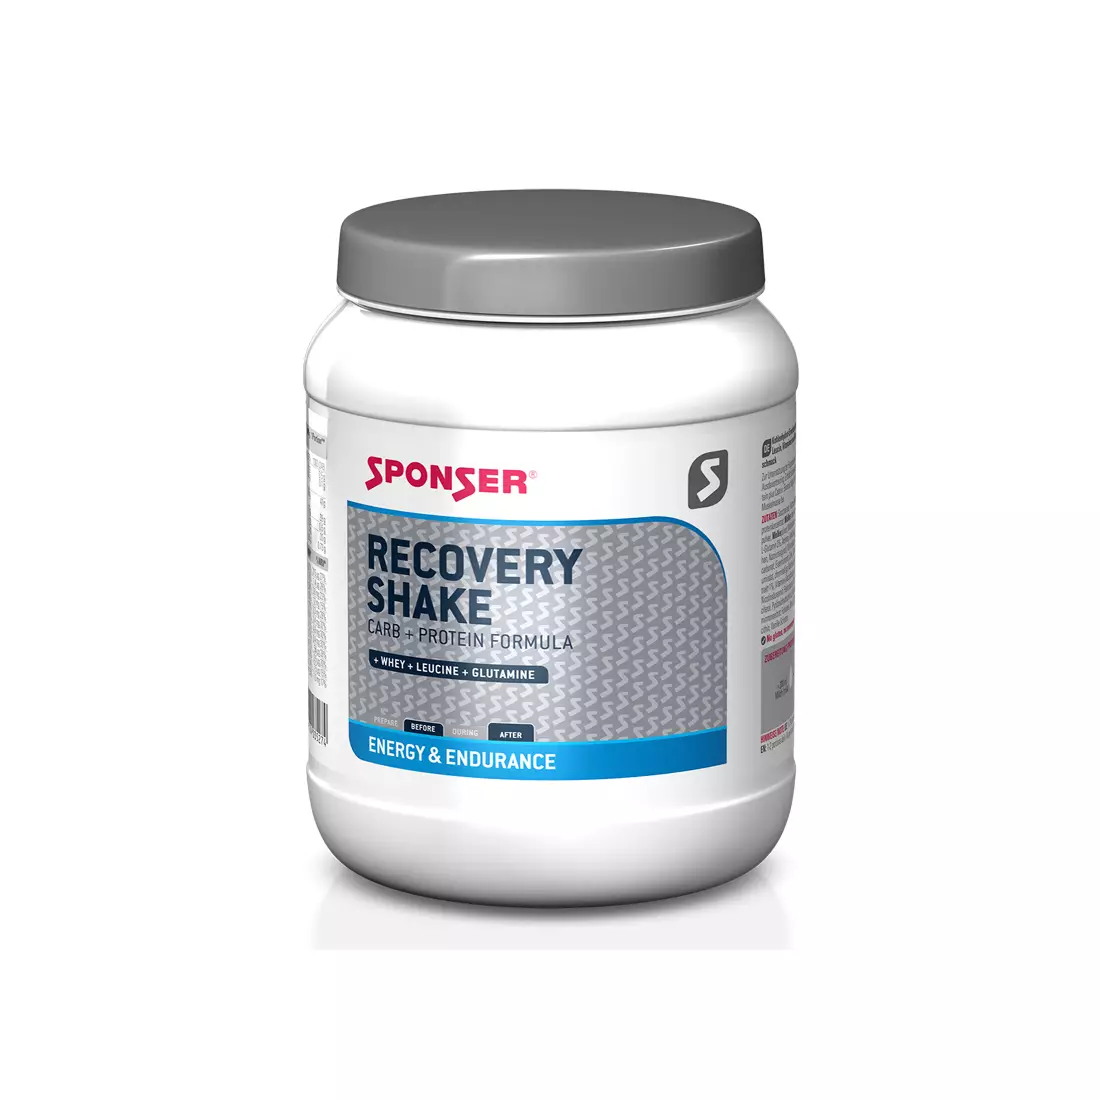 Drink SPONSER RECOVERY SHAKE banana can 900g